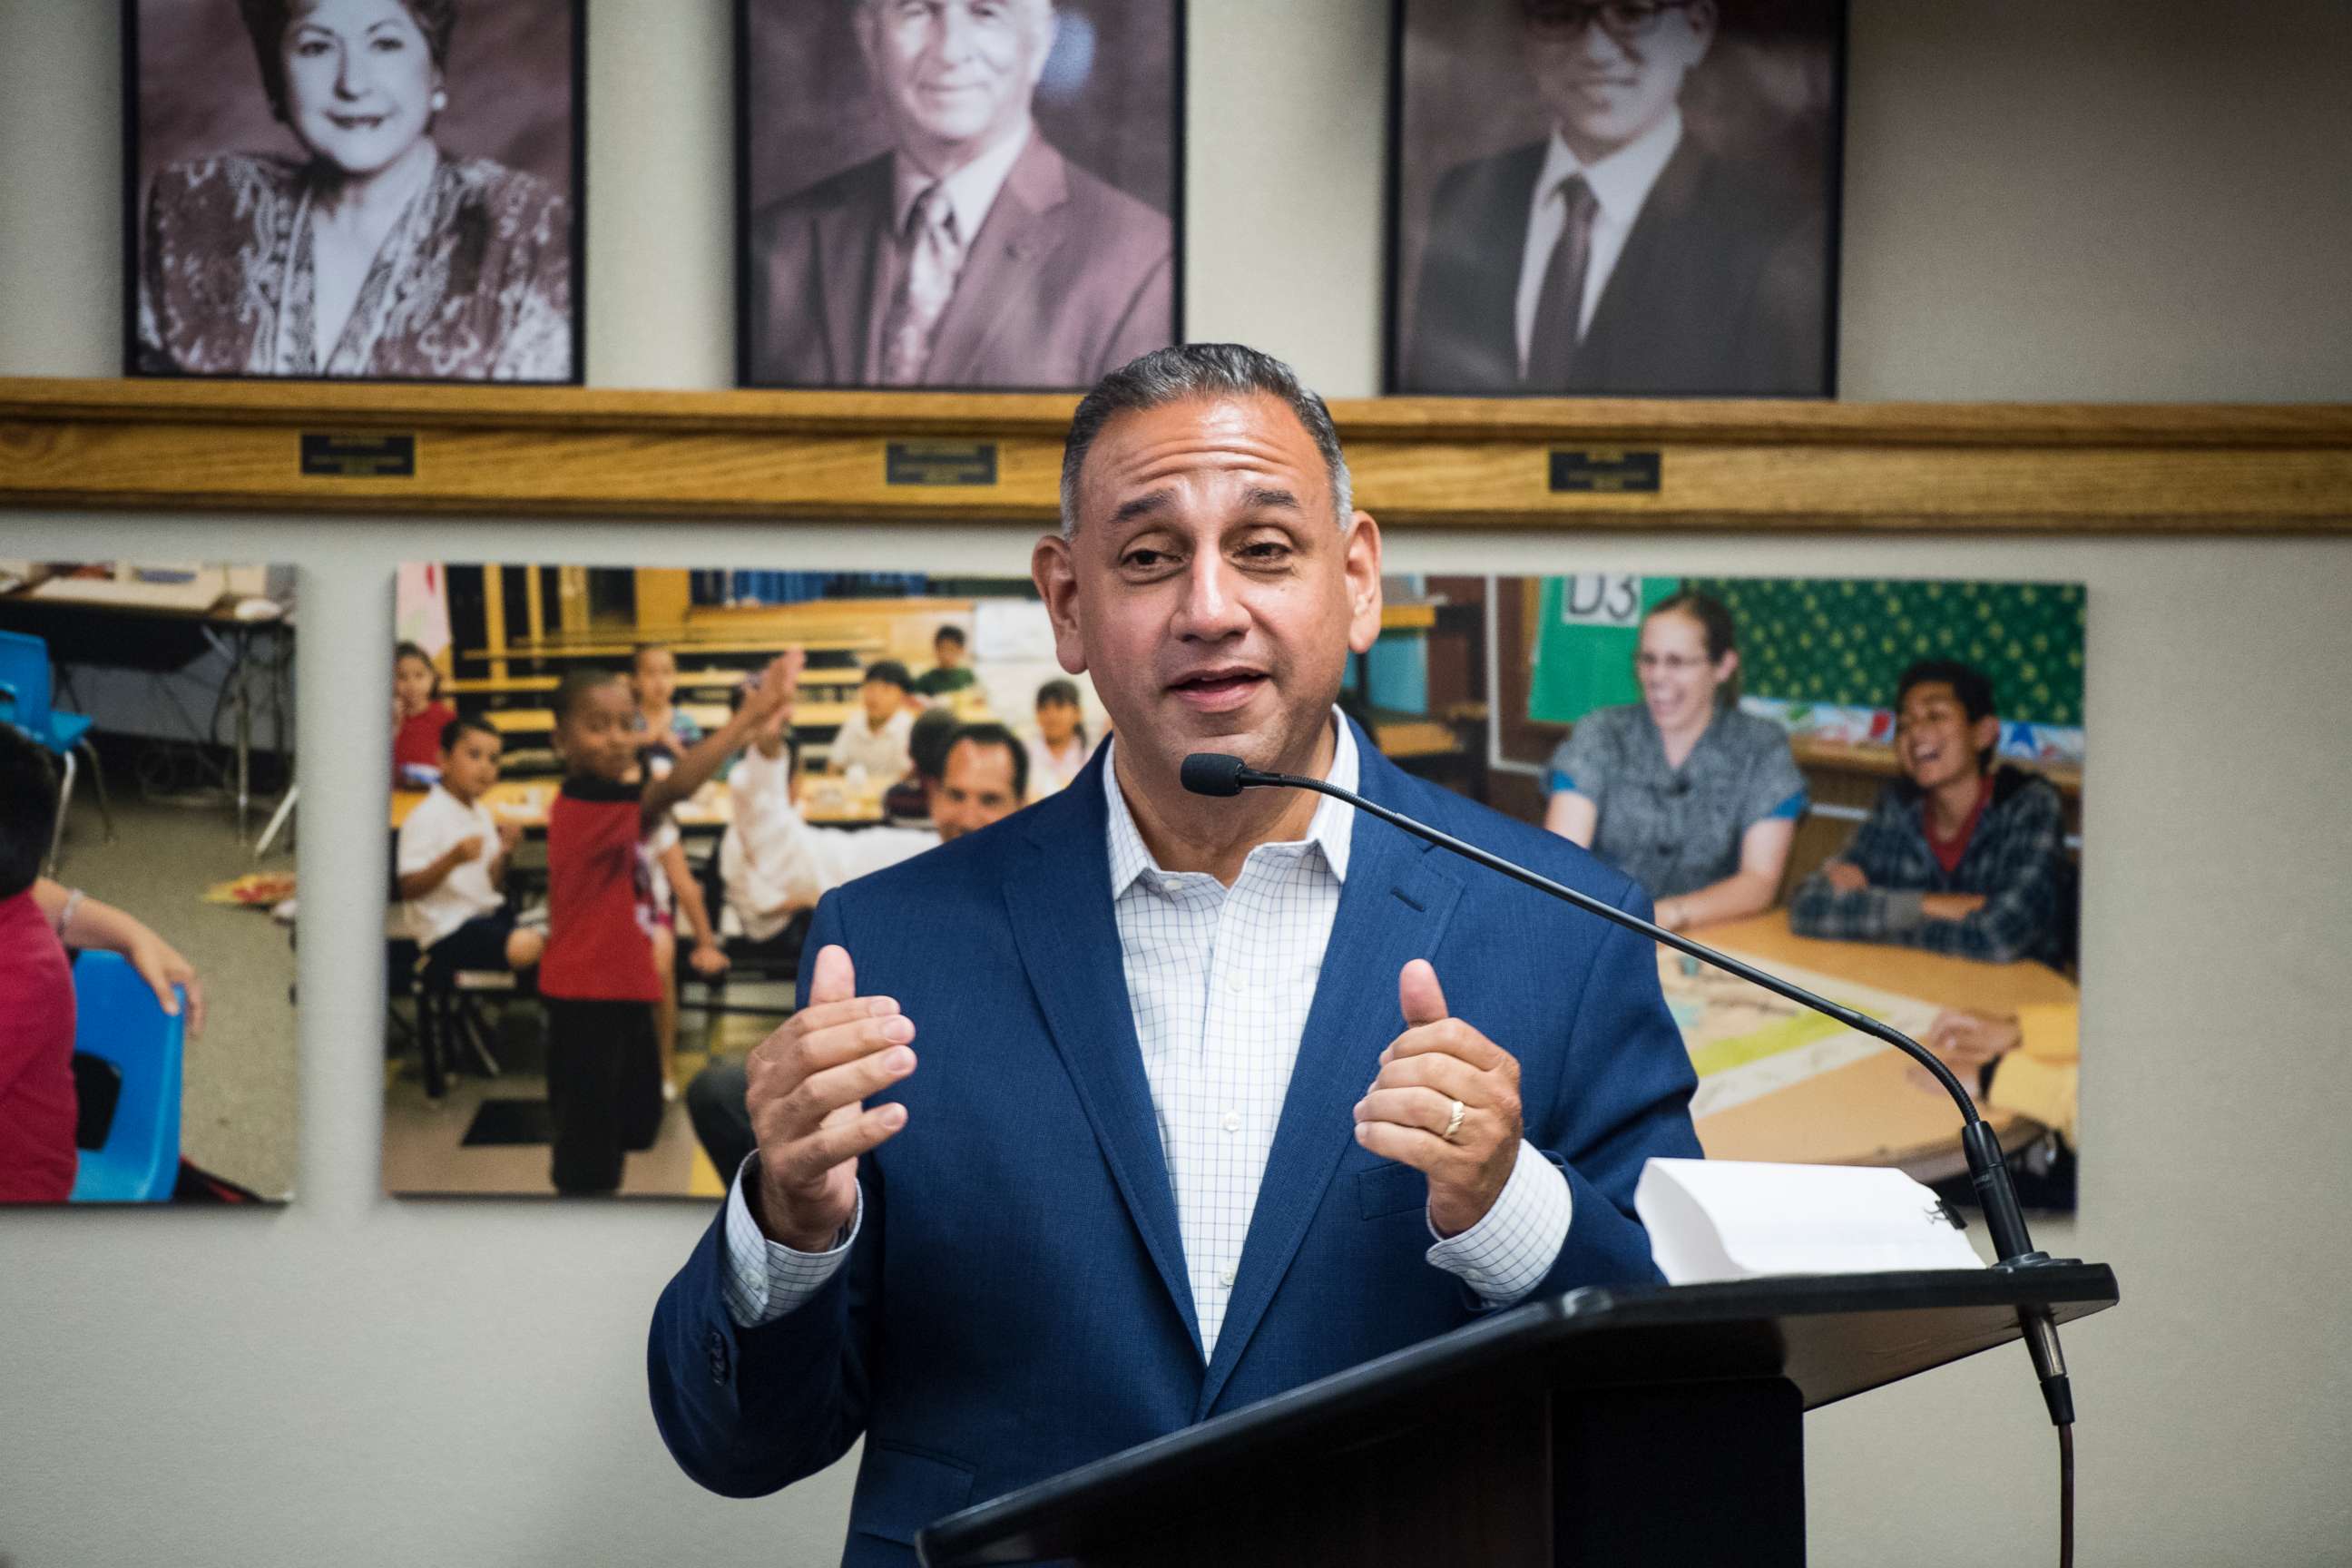 PHOTO: Gil Cisneros, Democrat running for California's 39th Congressional district seat in Congress, speaks, May 21, 2018.